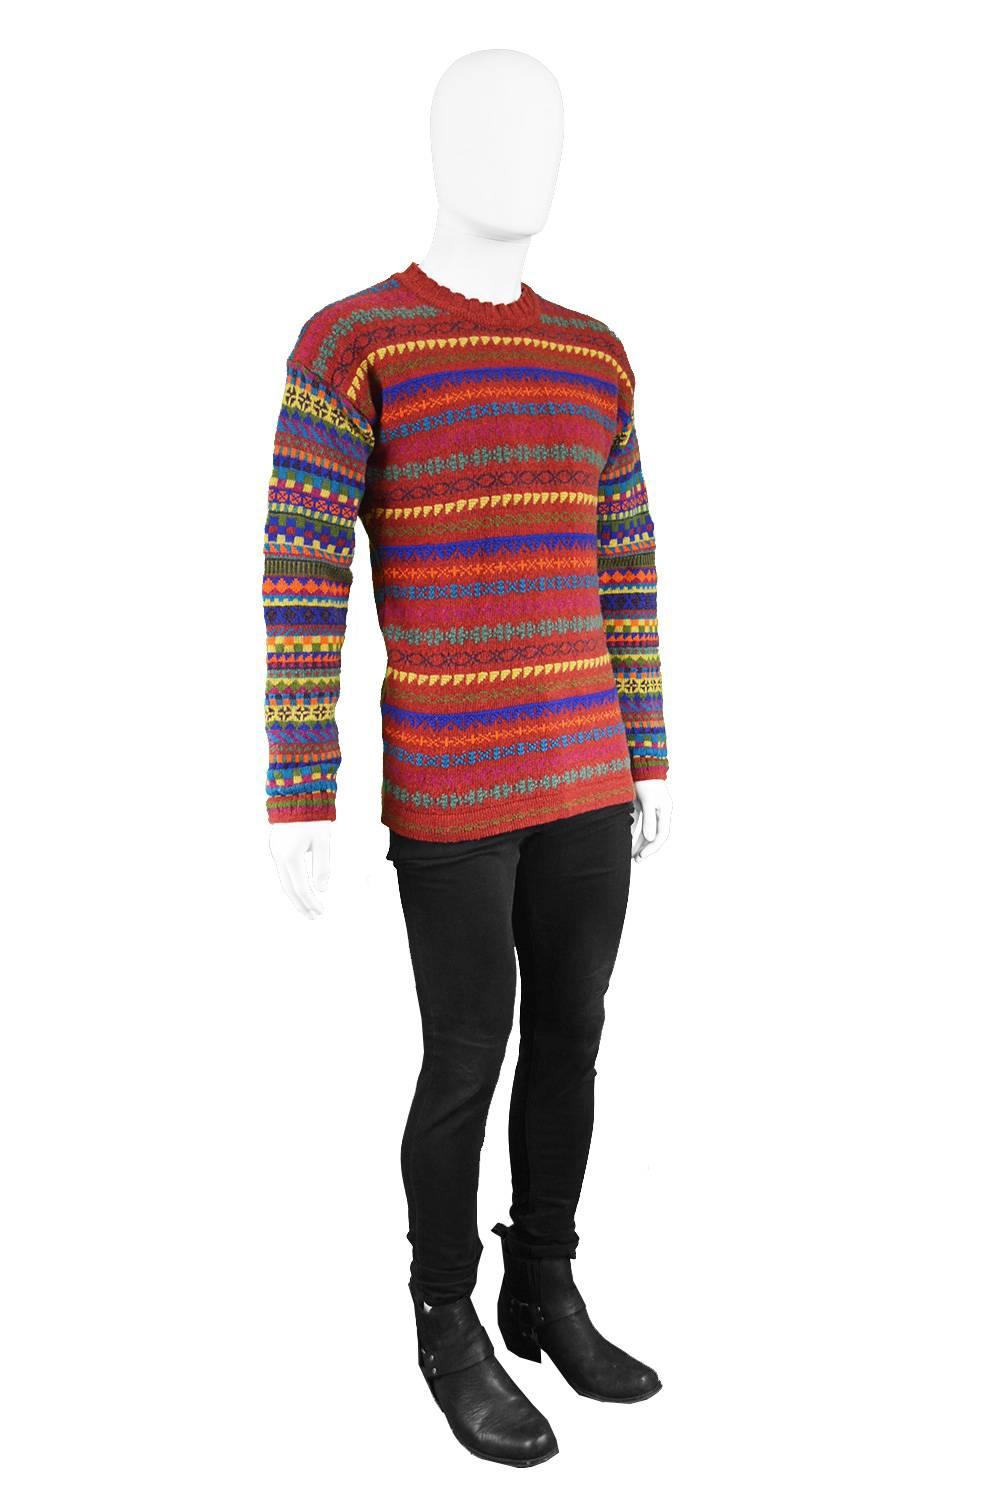 Kenzo Homme Men's Red Geometric Knit Vintage Panelled Sweater, 1980s For Sale 1